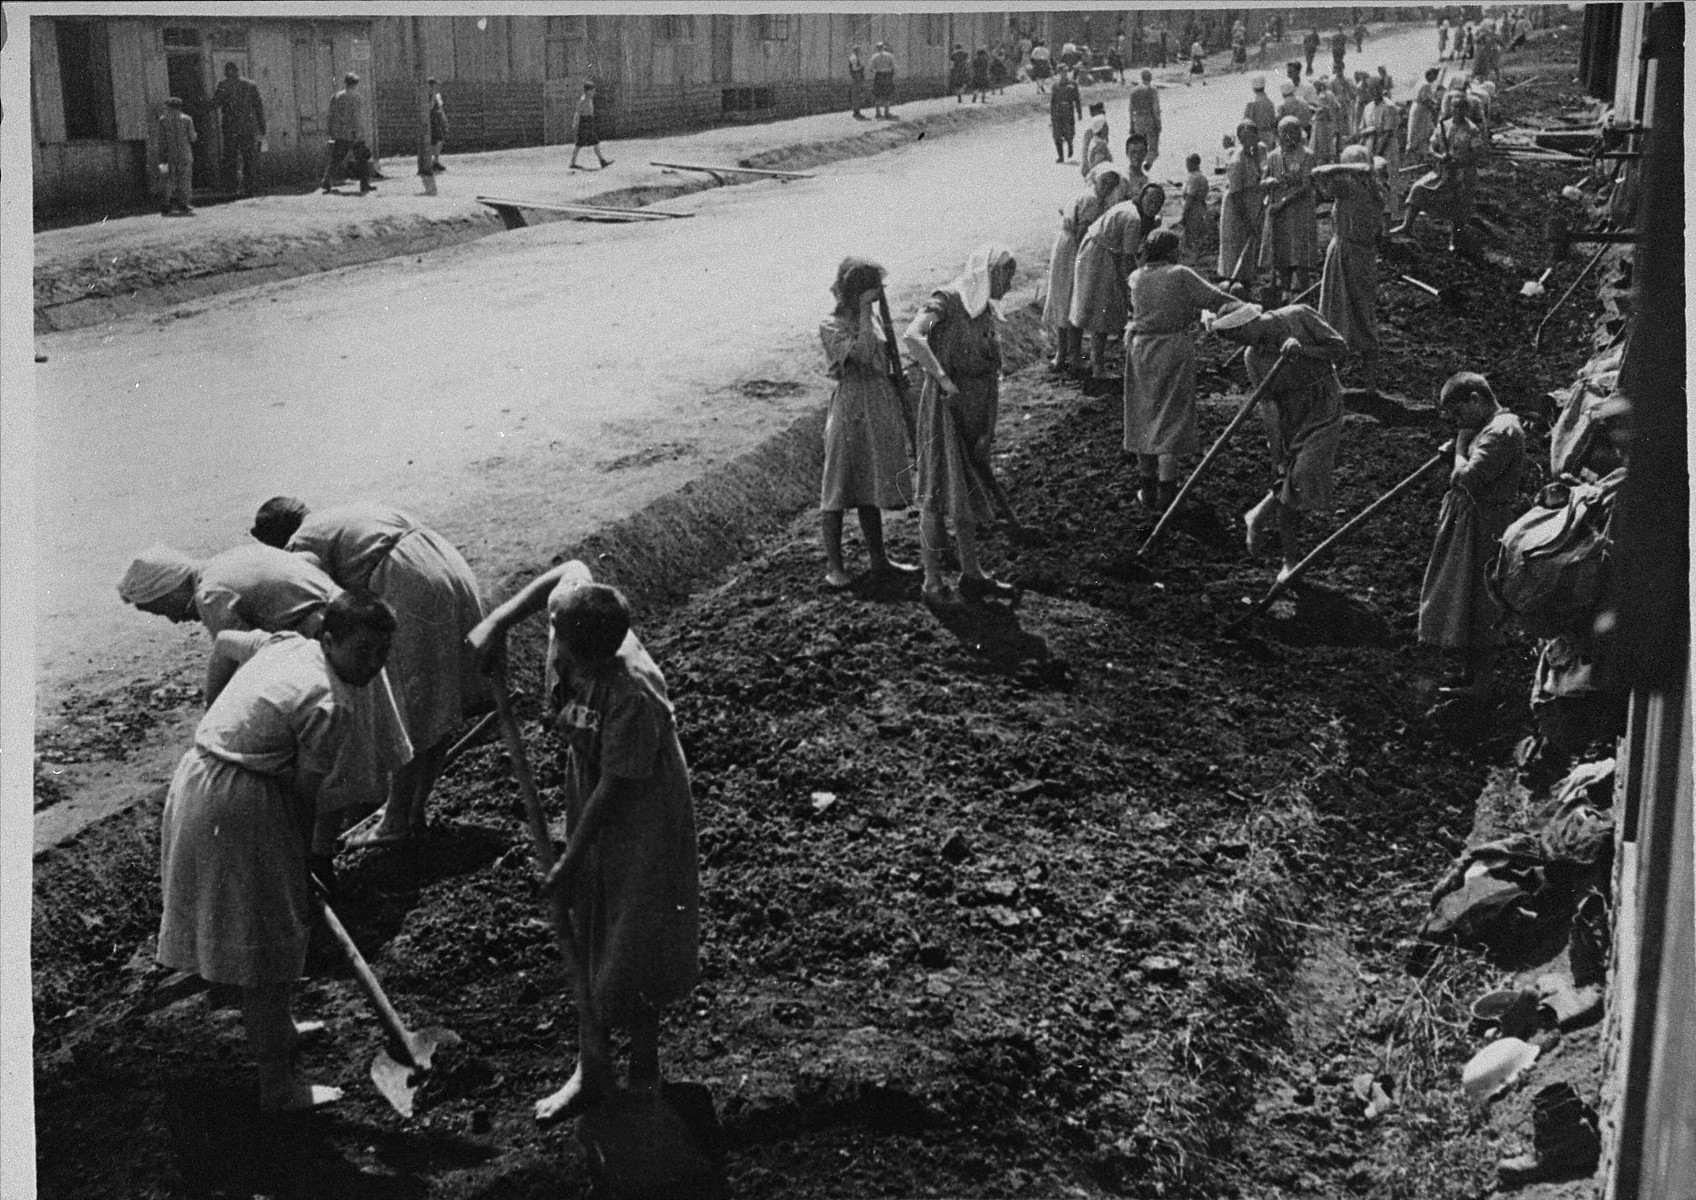 Jewish women at forced labor in the Plaszow labor camp.